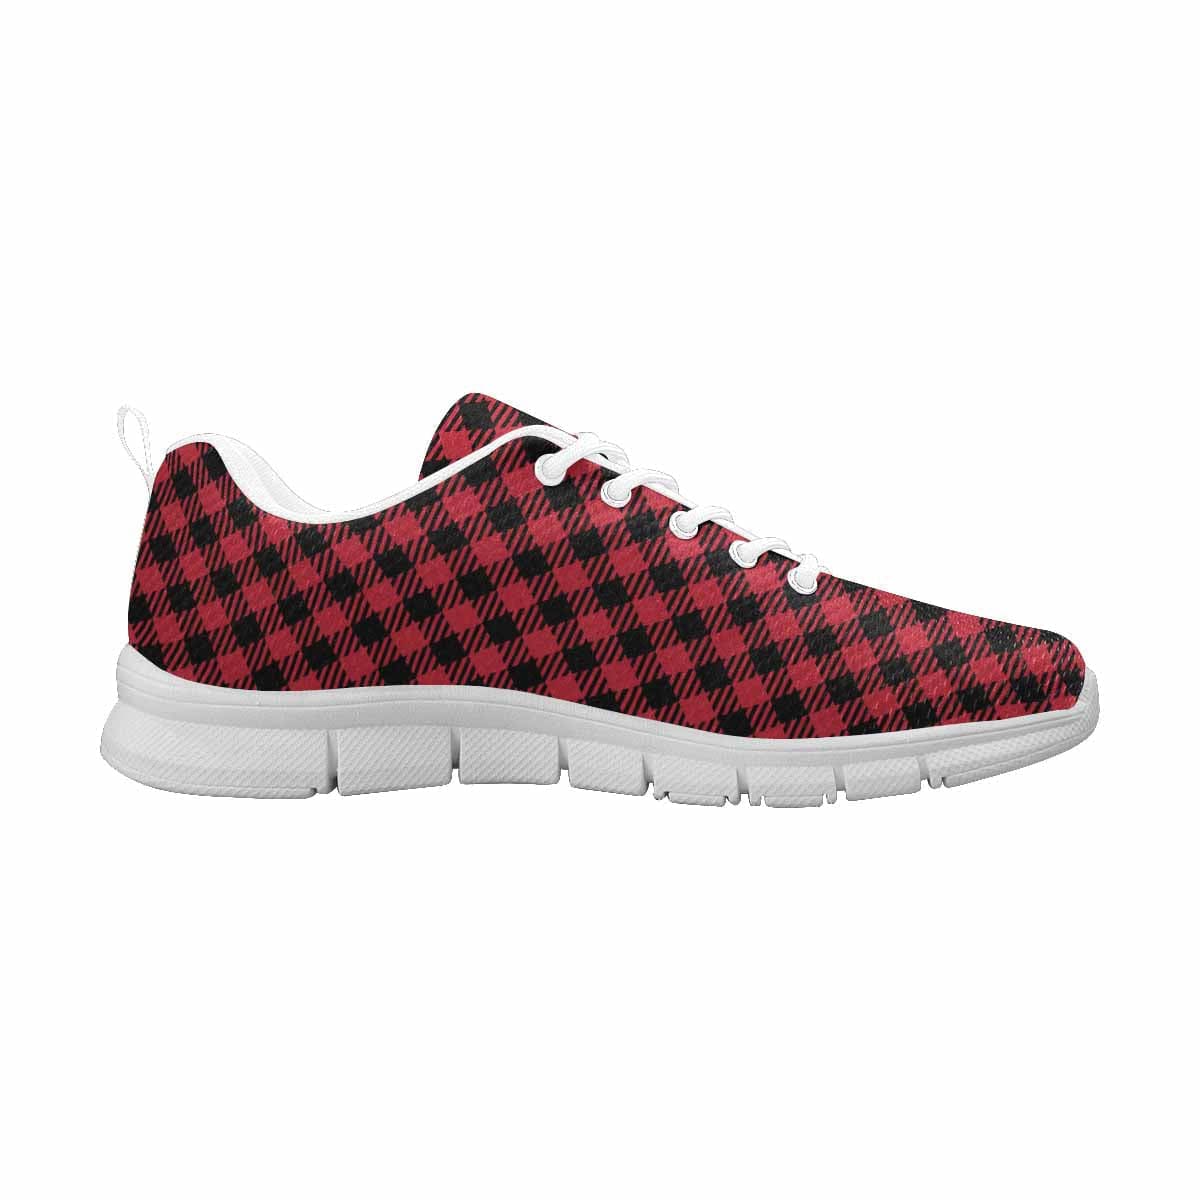 Sneakers For Men Buffalo Plaid Red And Black - Running Shoes Dg847 - Mens |